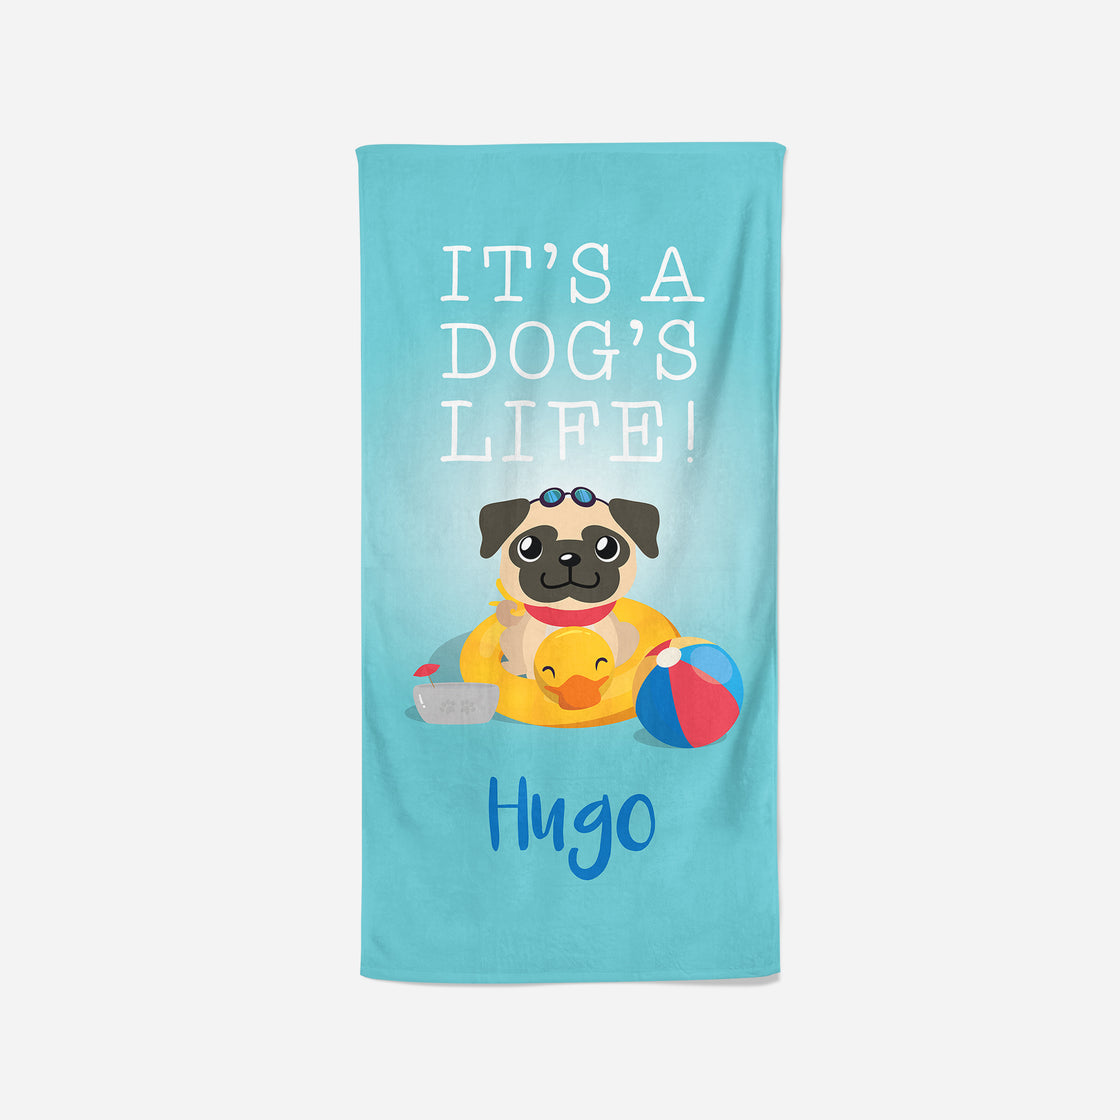 Fawn Pug Towel Blue - Its a Dogs life - Personalise with Name